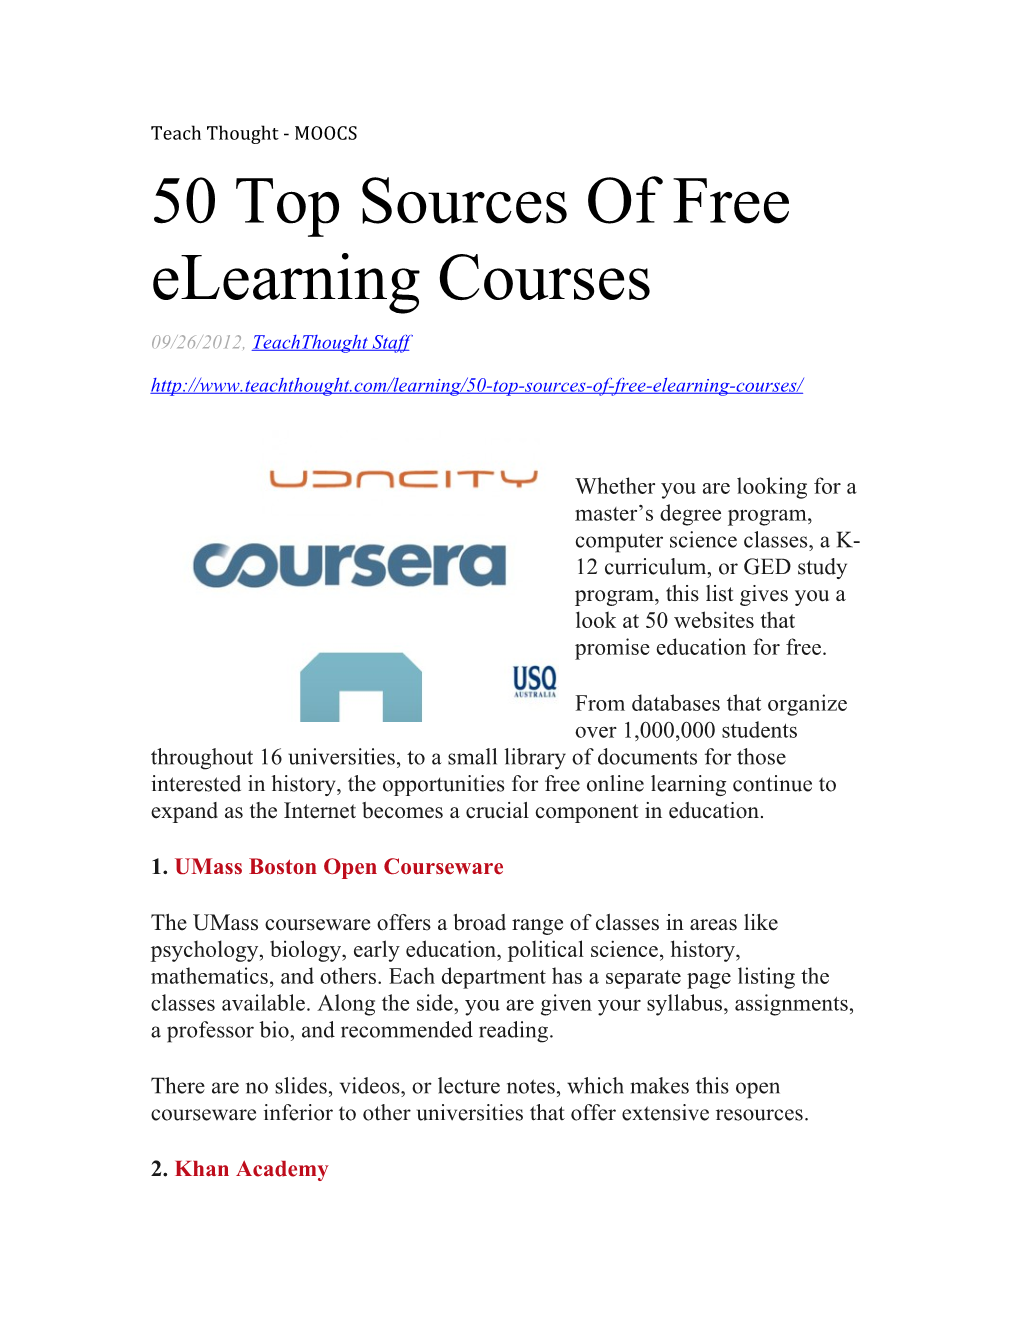 50 Top Sources of Free Elearning Courses